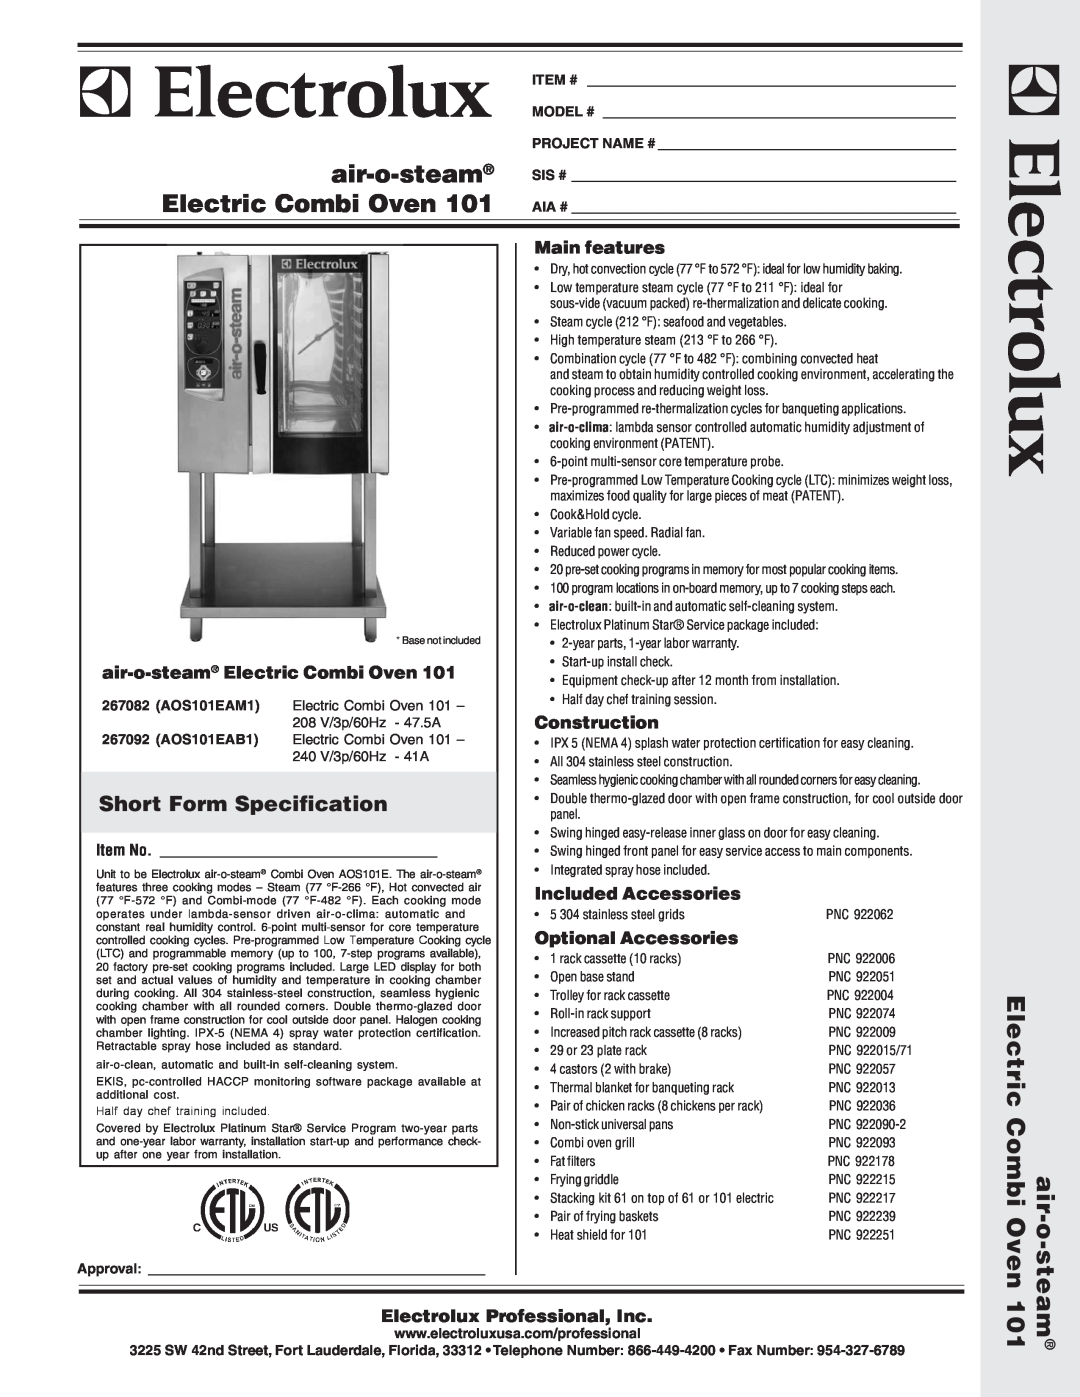 Electrolux 267082 (AOS101EAM1) warranty Short Form Specification, air-o-steam Electric Combi Oven, Main features, Item # 